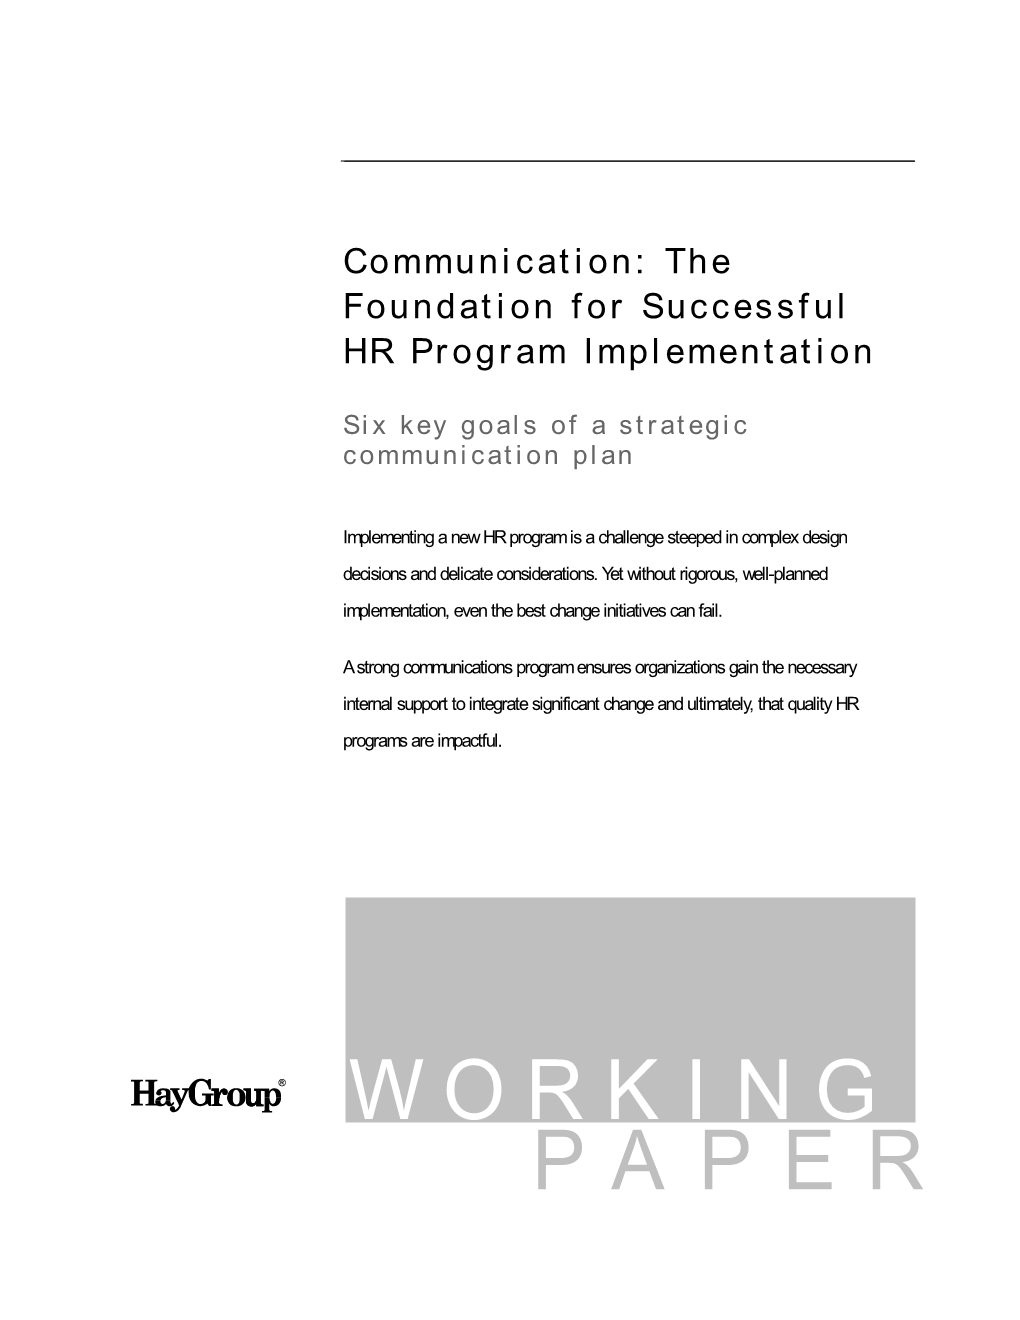 Communication: the Foundation for Successful HR Program Implementation